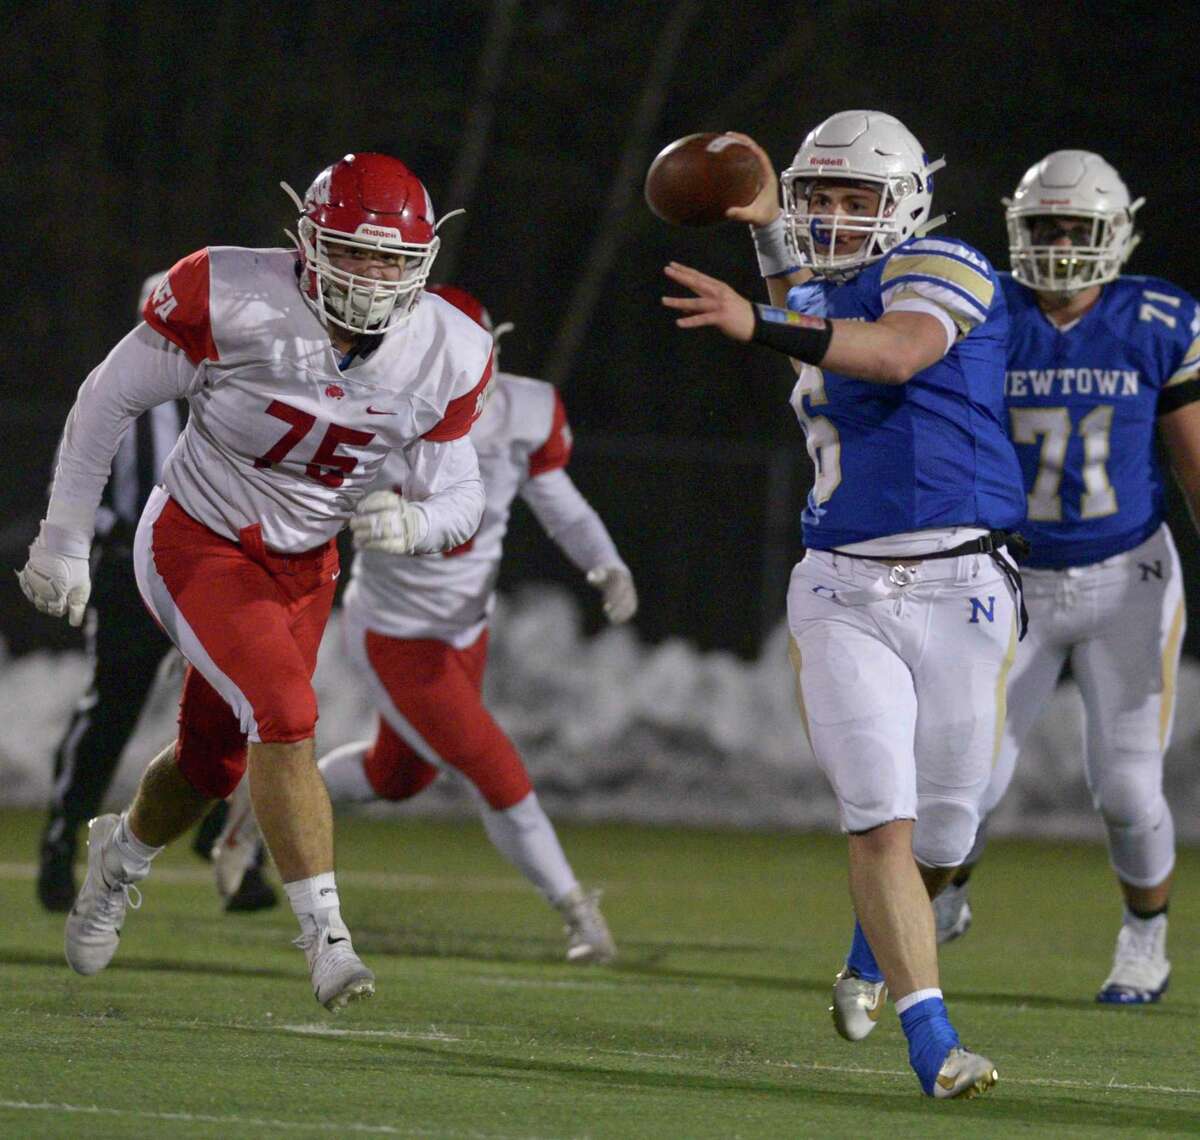 Newtown quarterback Brandon Lombardo (6) looks to throw while being chased by NFA's Joshua Brown (75) in the Class LL State Football Quarterfinal game between No.8 Norwich Free Academy and No. 1 Newtown high schools, Wednesday December 4, 2019, at Newtown High School, Newtown, Conn.